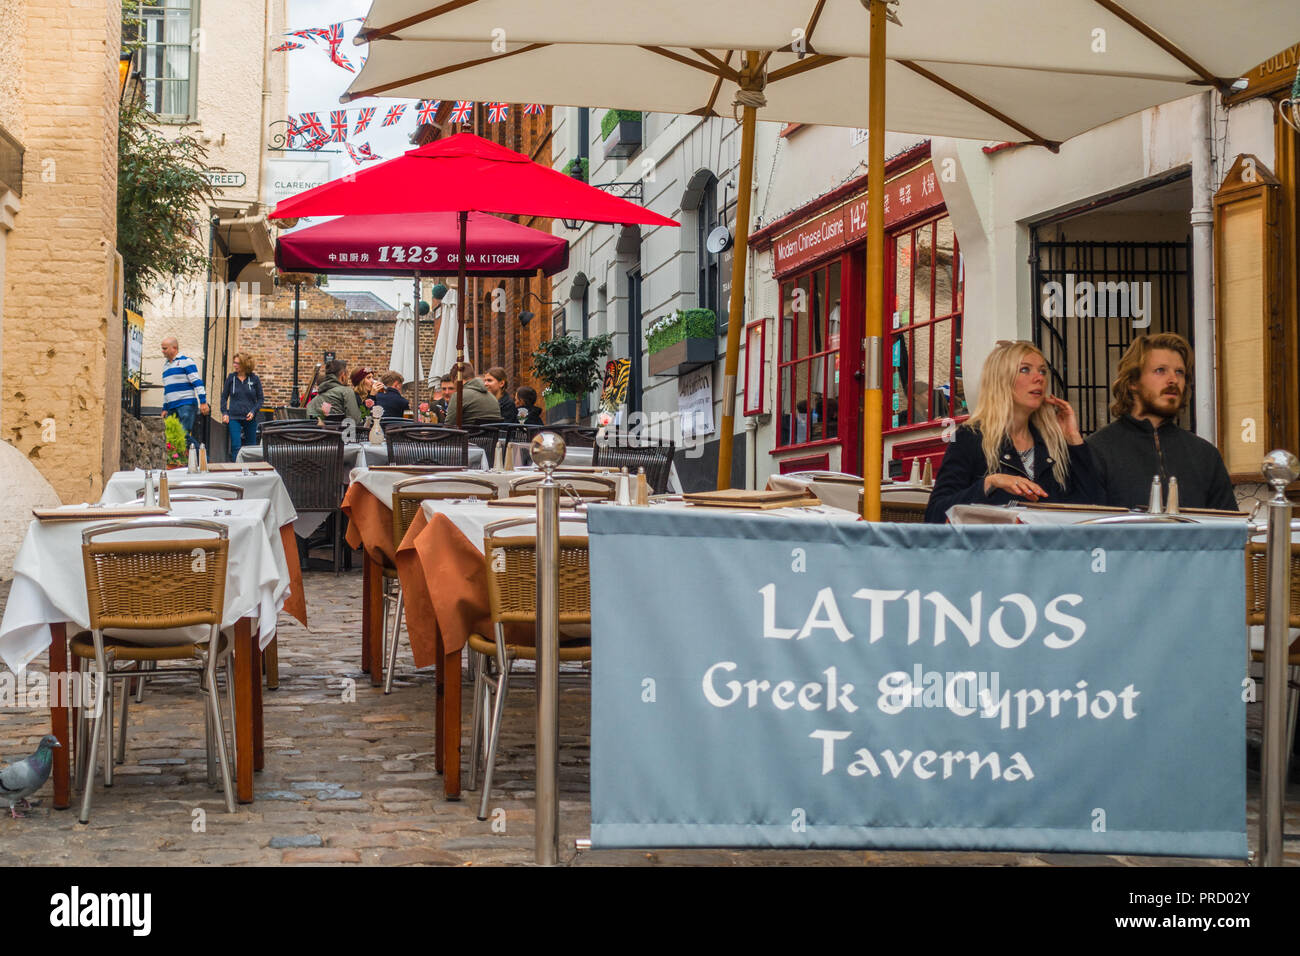 Latinos Greek and Cypriot Taverna on Church Lane in Windsor, UK with a outdoor tables neatly laid out for lunchtime trade. Stock Photo